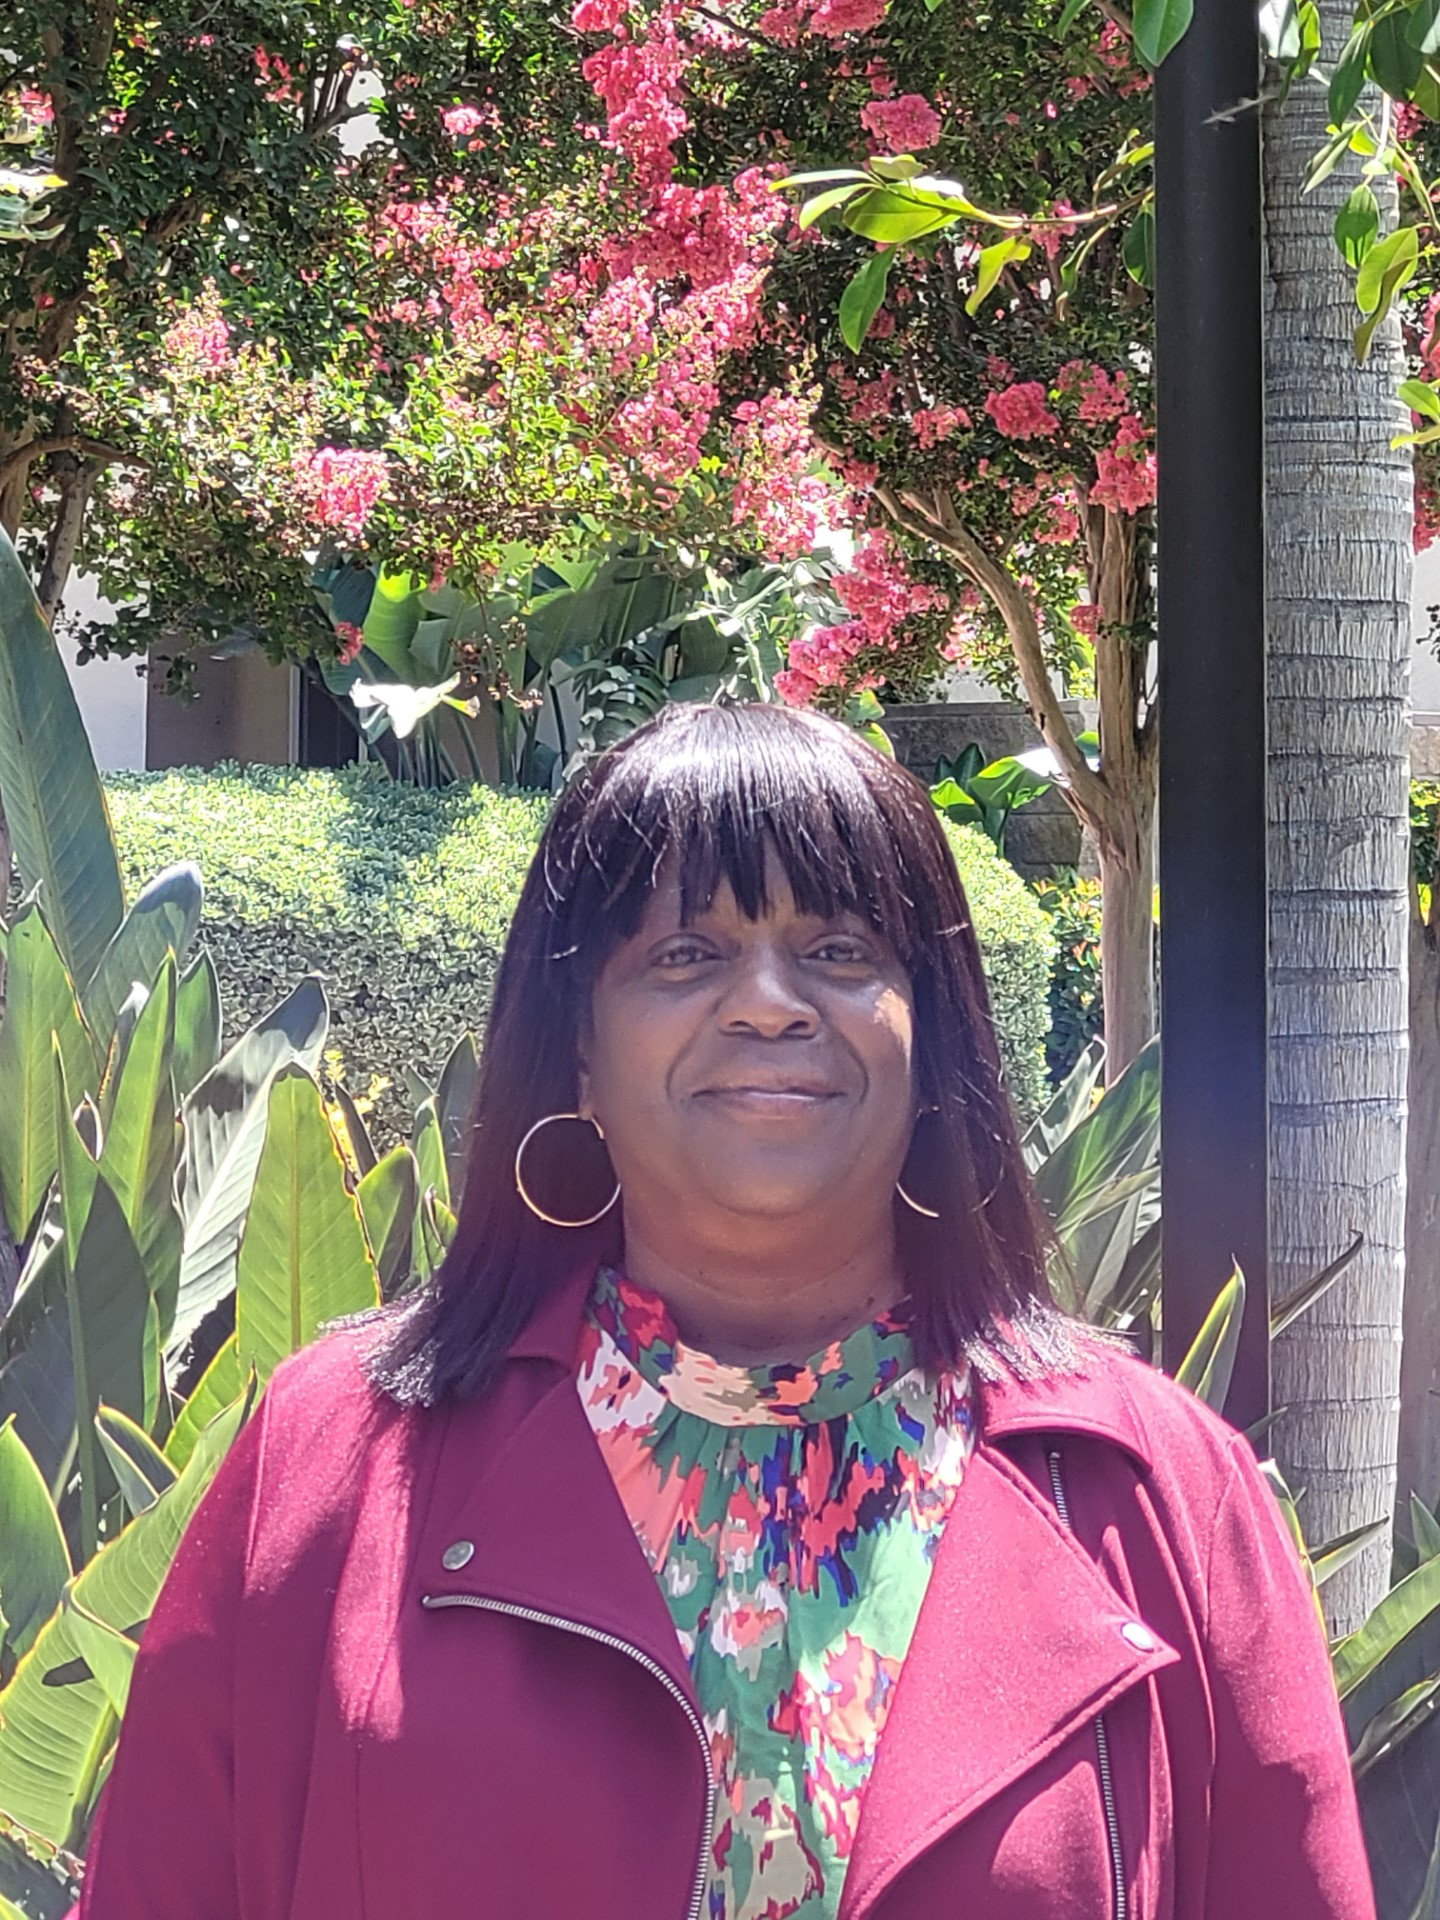 I am an African American woman with straight brown shoulder length hair with bangs. I have large brown eyes, cocoa brown skin and I am wearing hoop earrings. I'm wearing a multicolored blouse with a red jacket. Behind me are green plants including palms and red flowers.